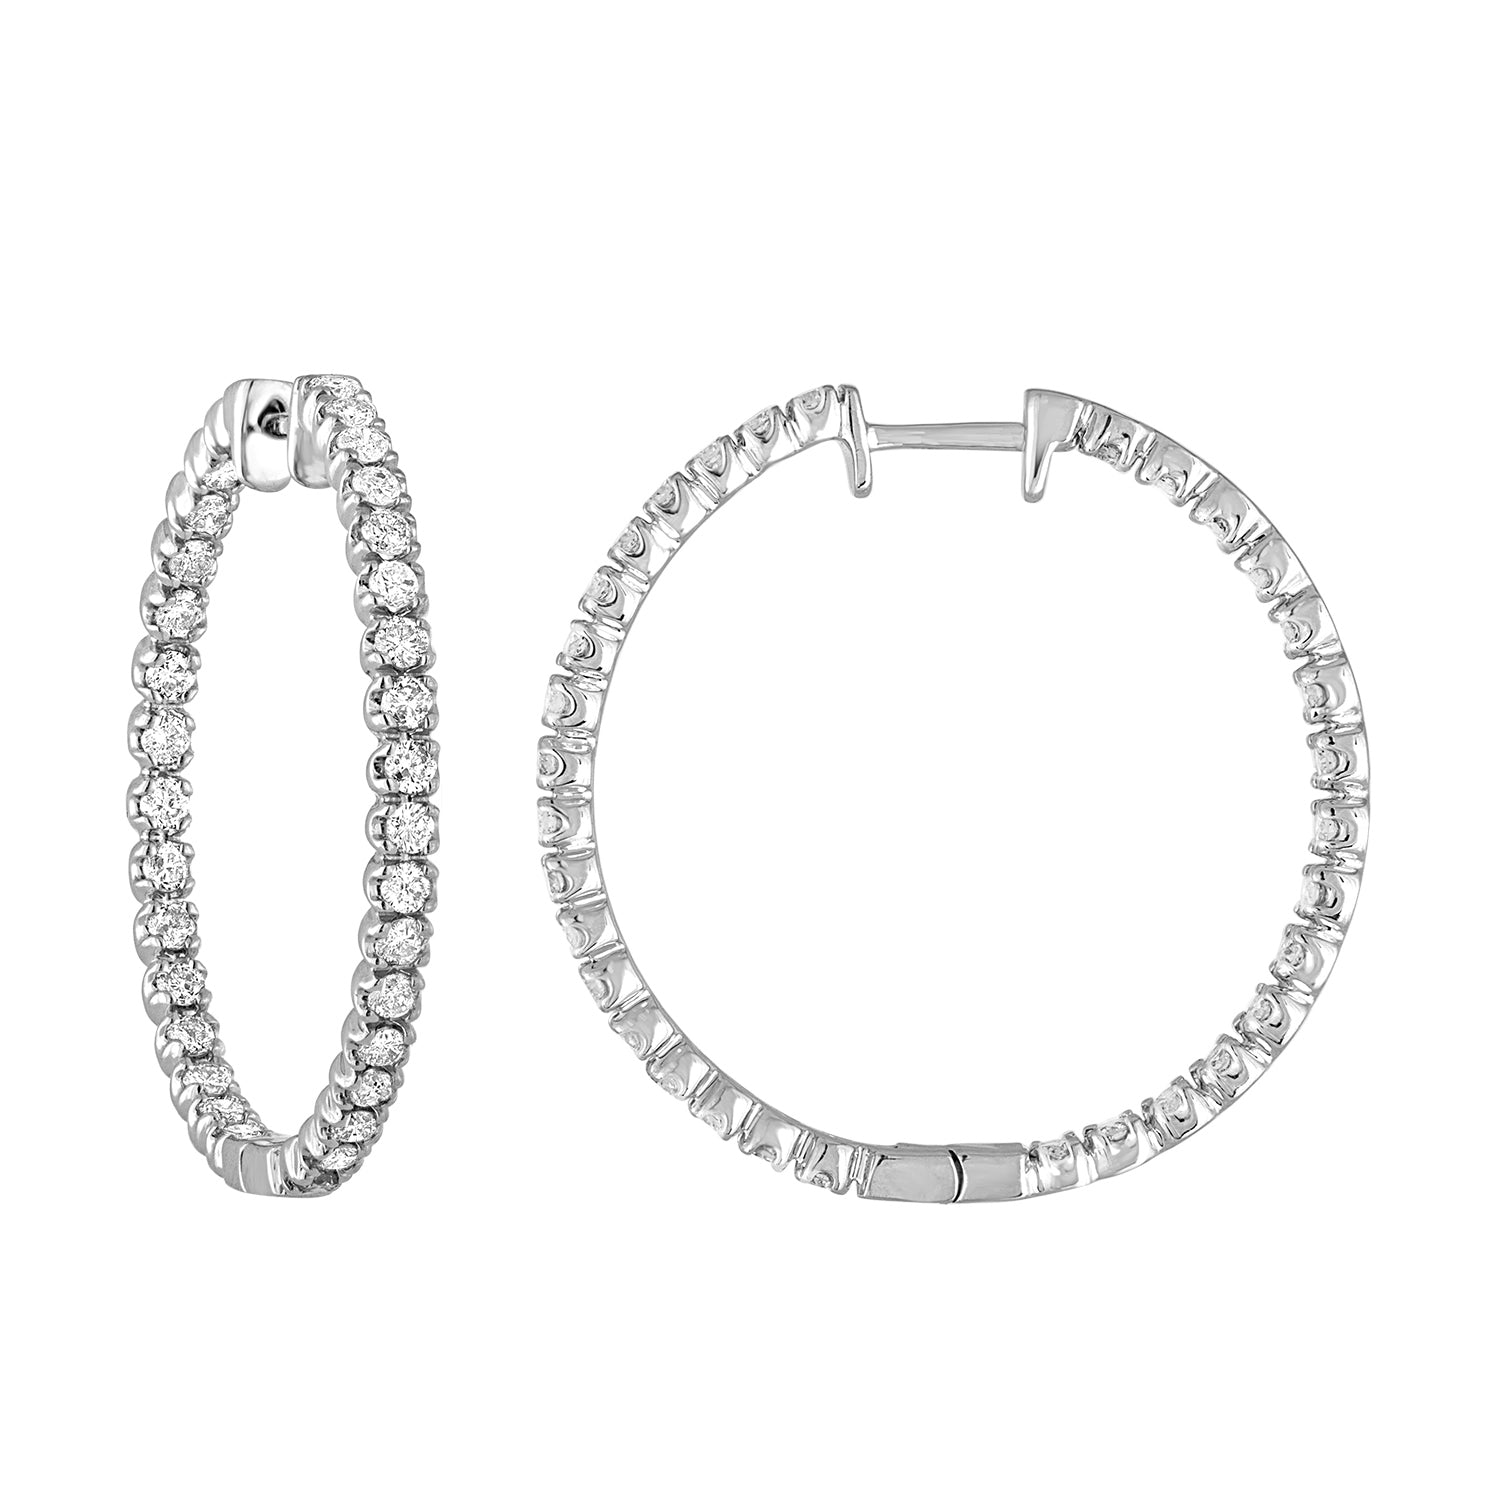 2 cttw Diamond Inside Out Hoop Earrings 14K White Gold Round Prong 1.26 inch